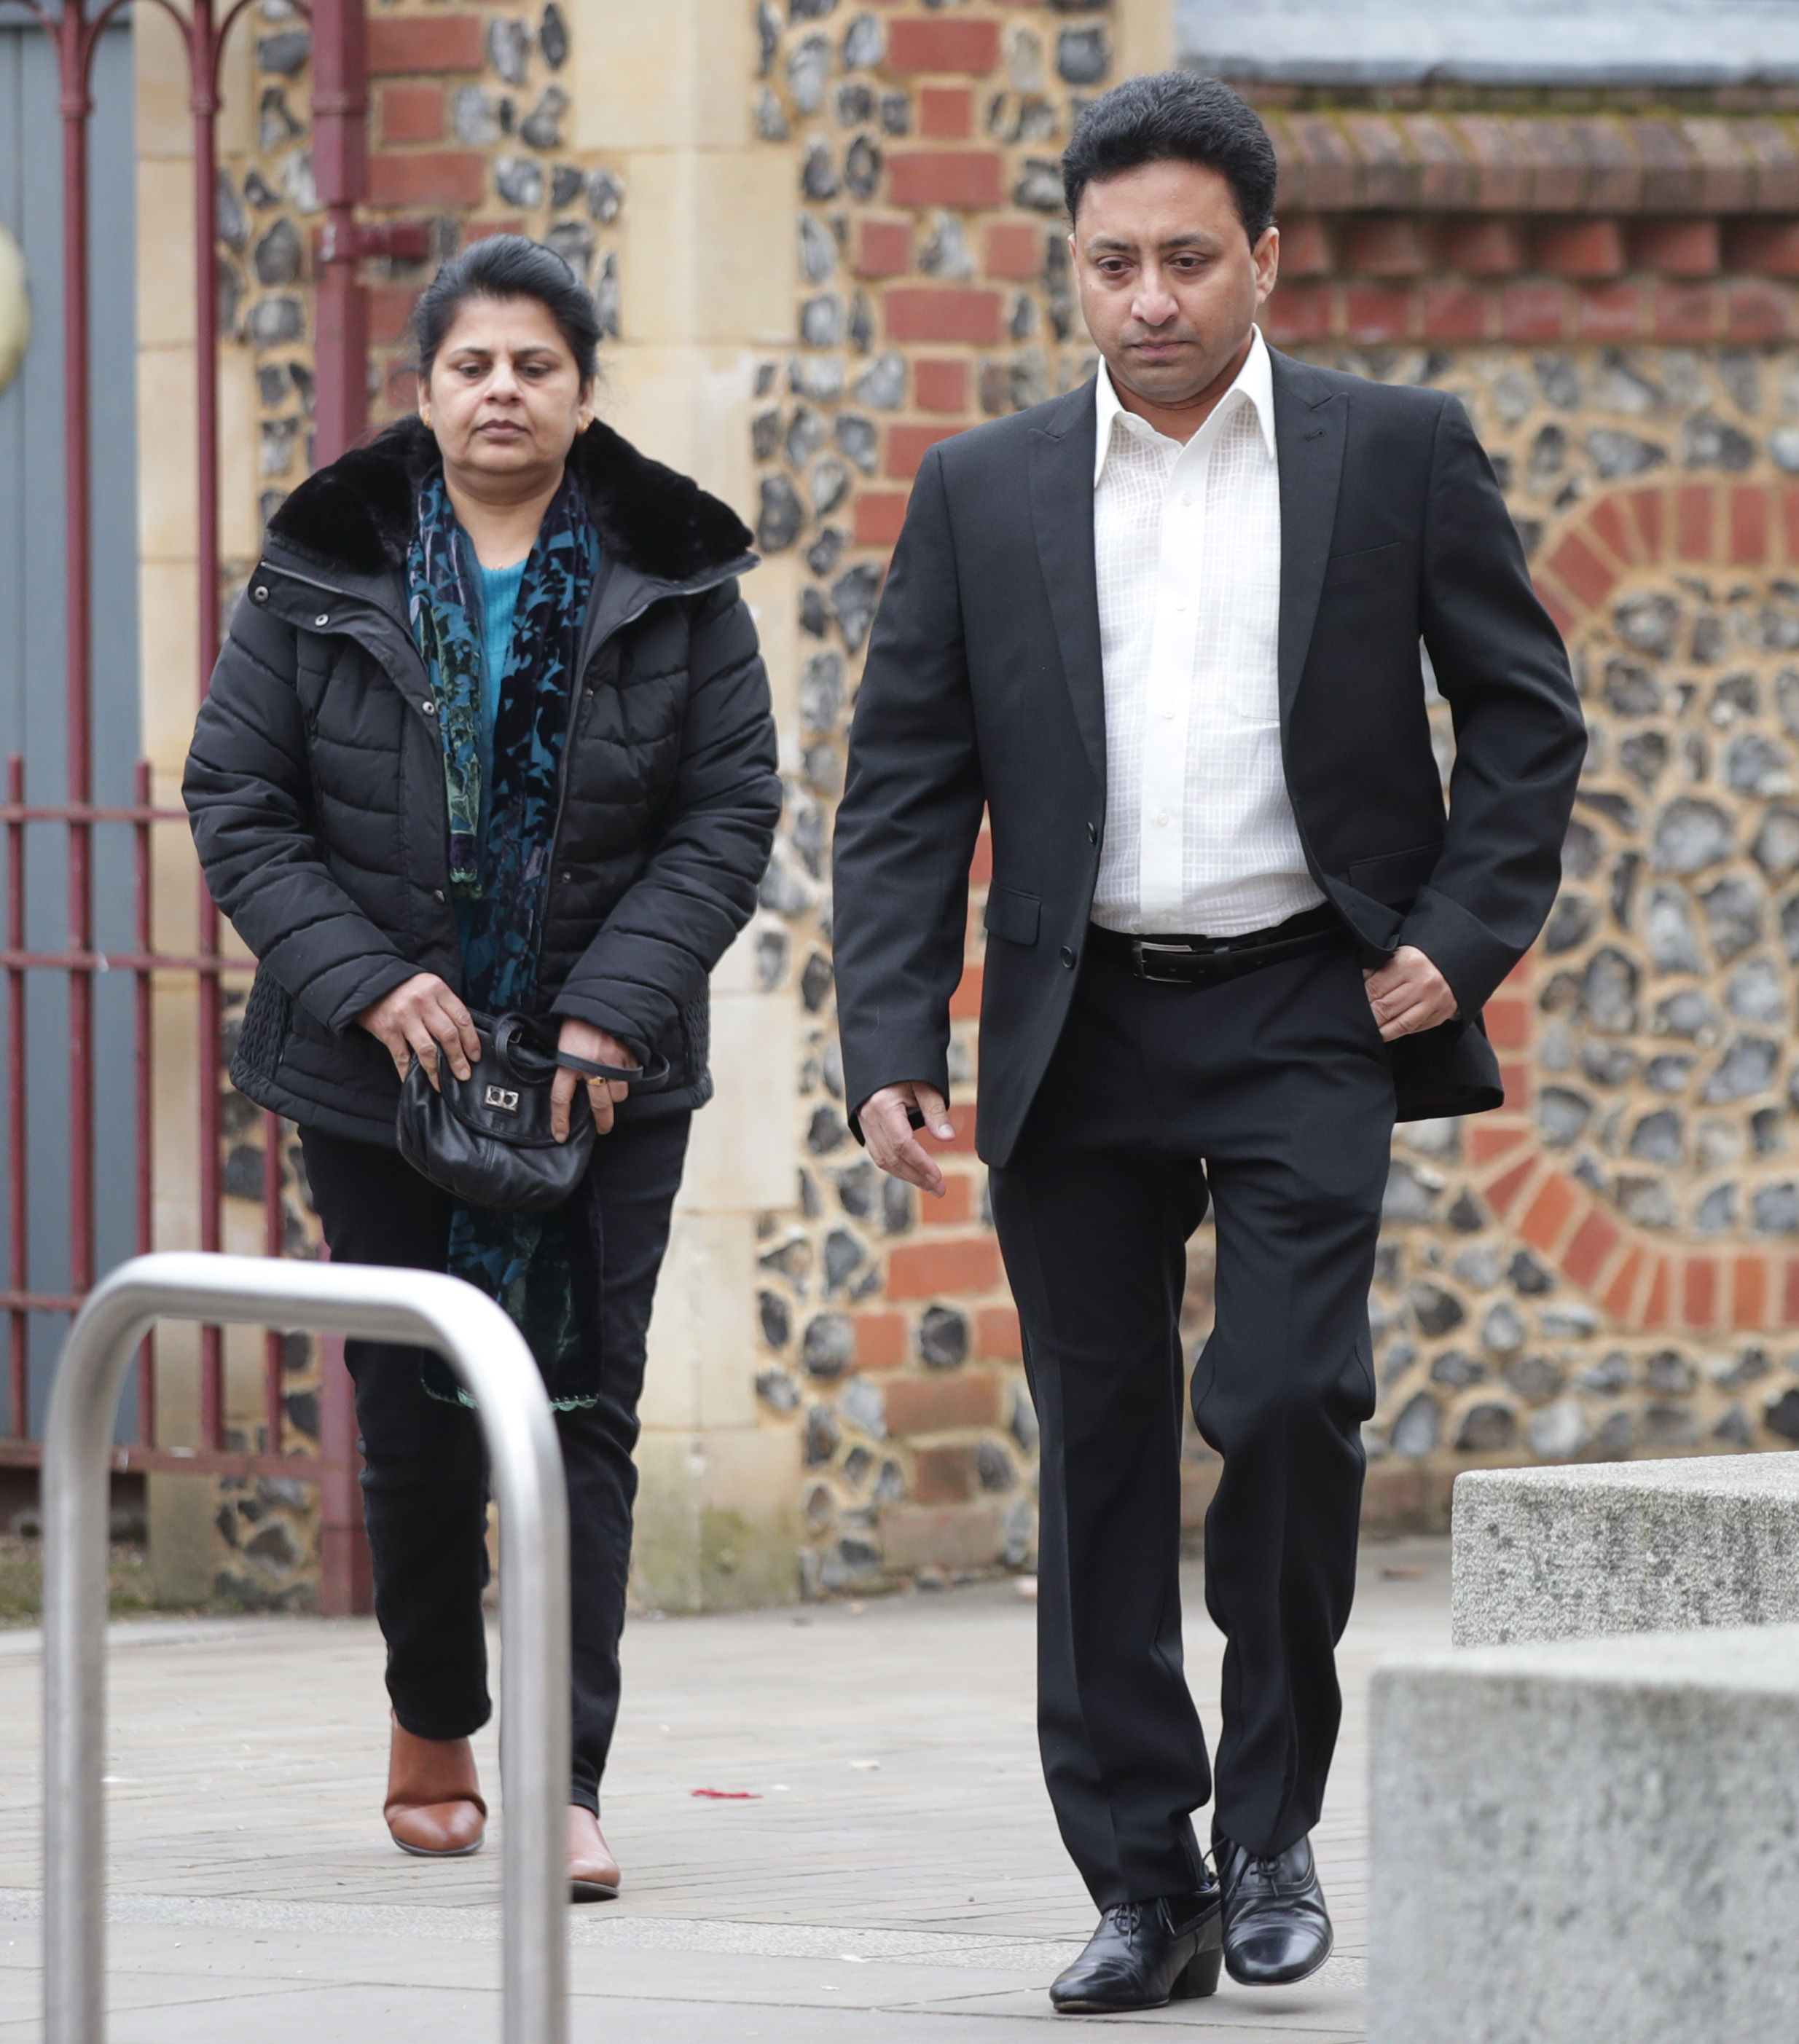 Ancy Joseph, widow of Cyriac Joseph, accompanied by Matthew John, a spokesman for the family and Ancy's cousin, arriving at Reading Crown Court (Yui Mok/PA)